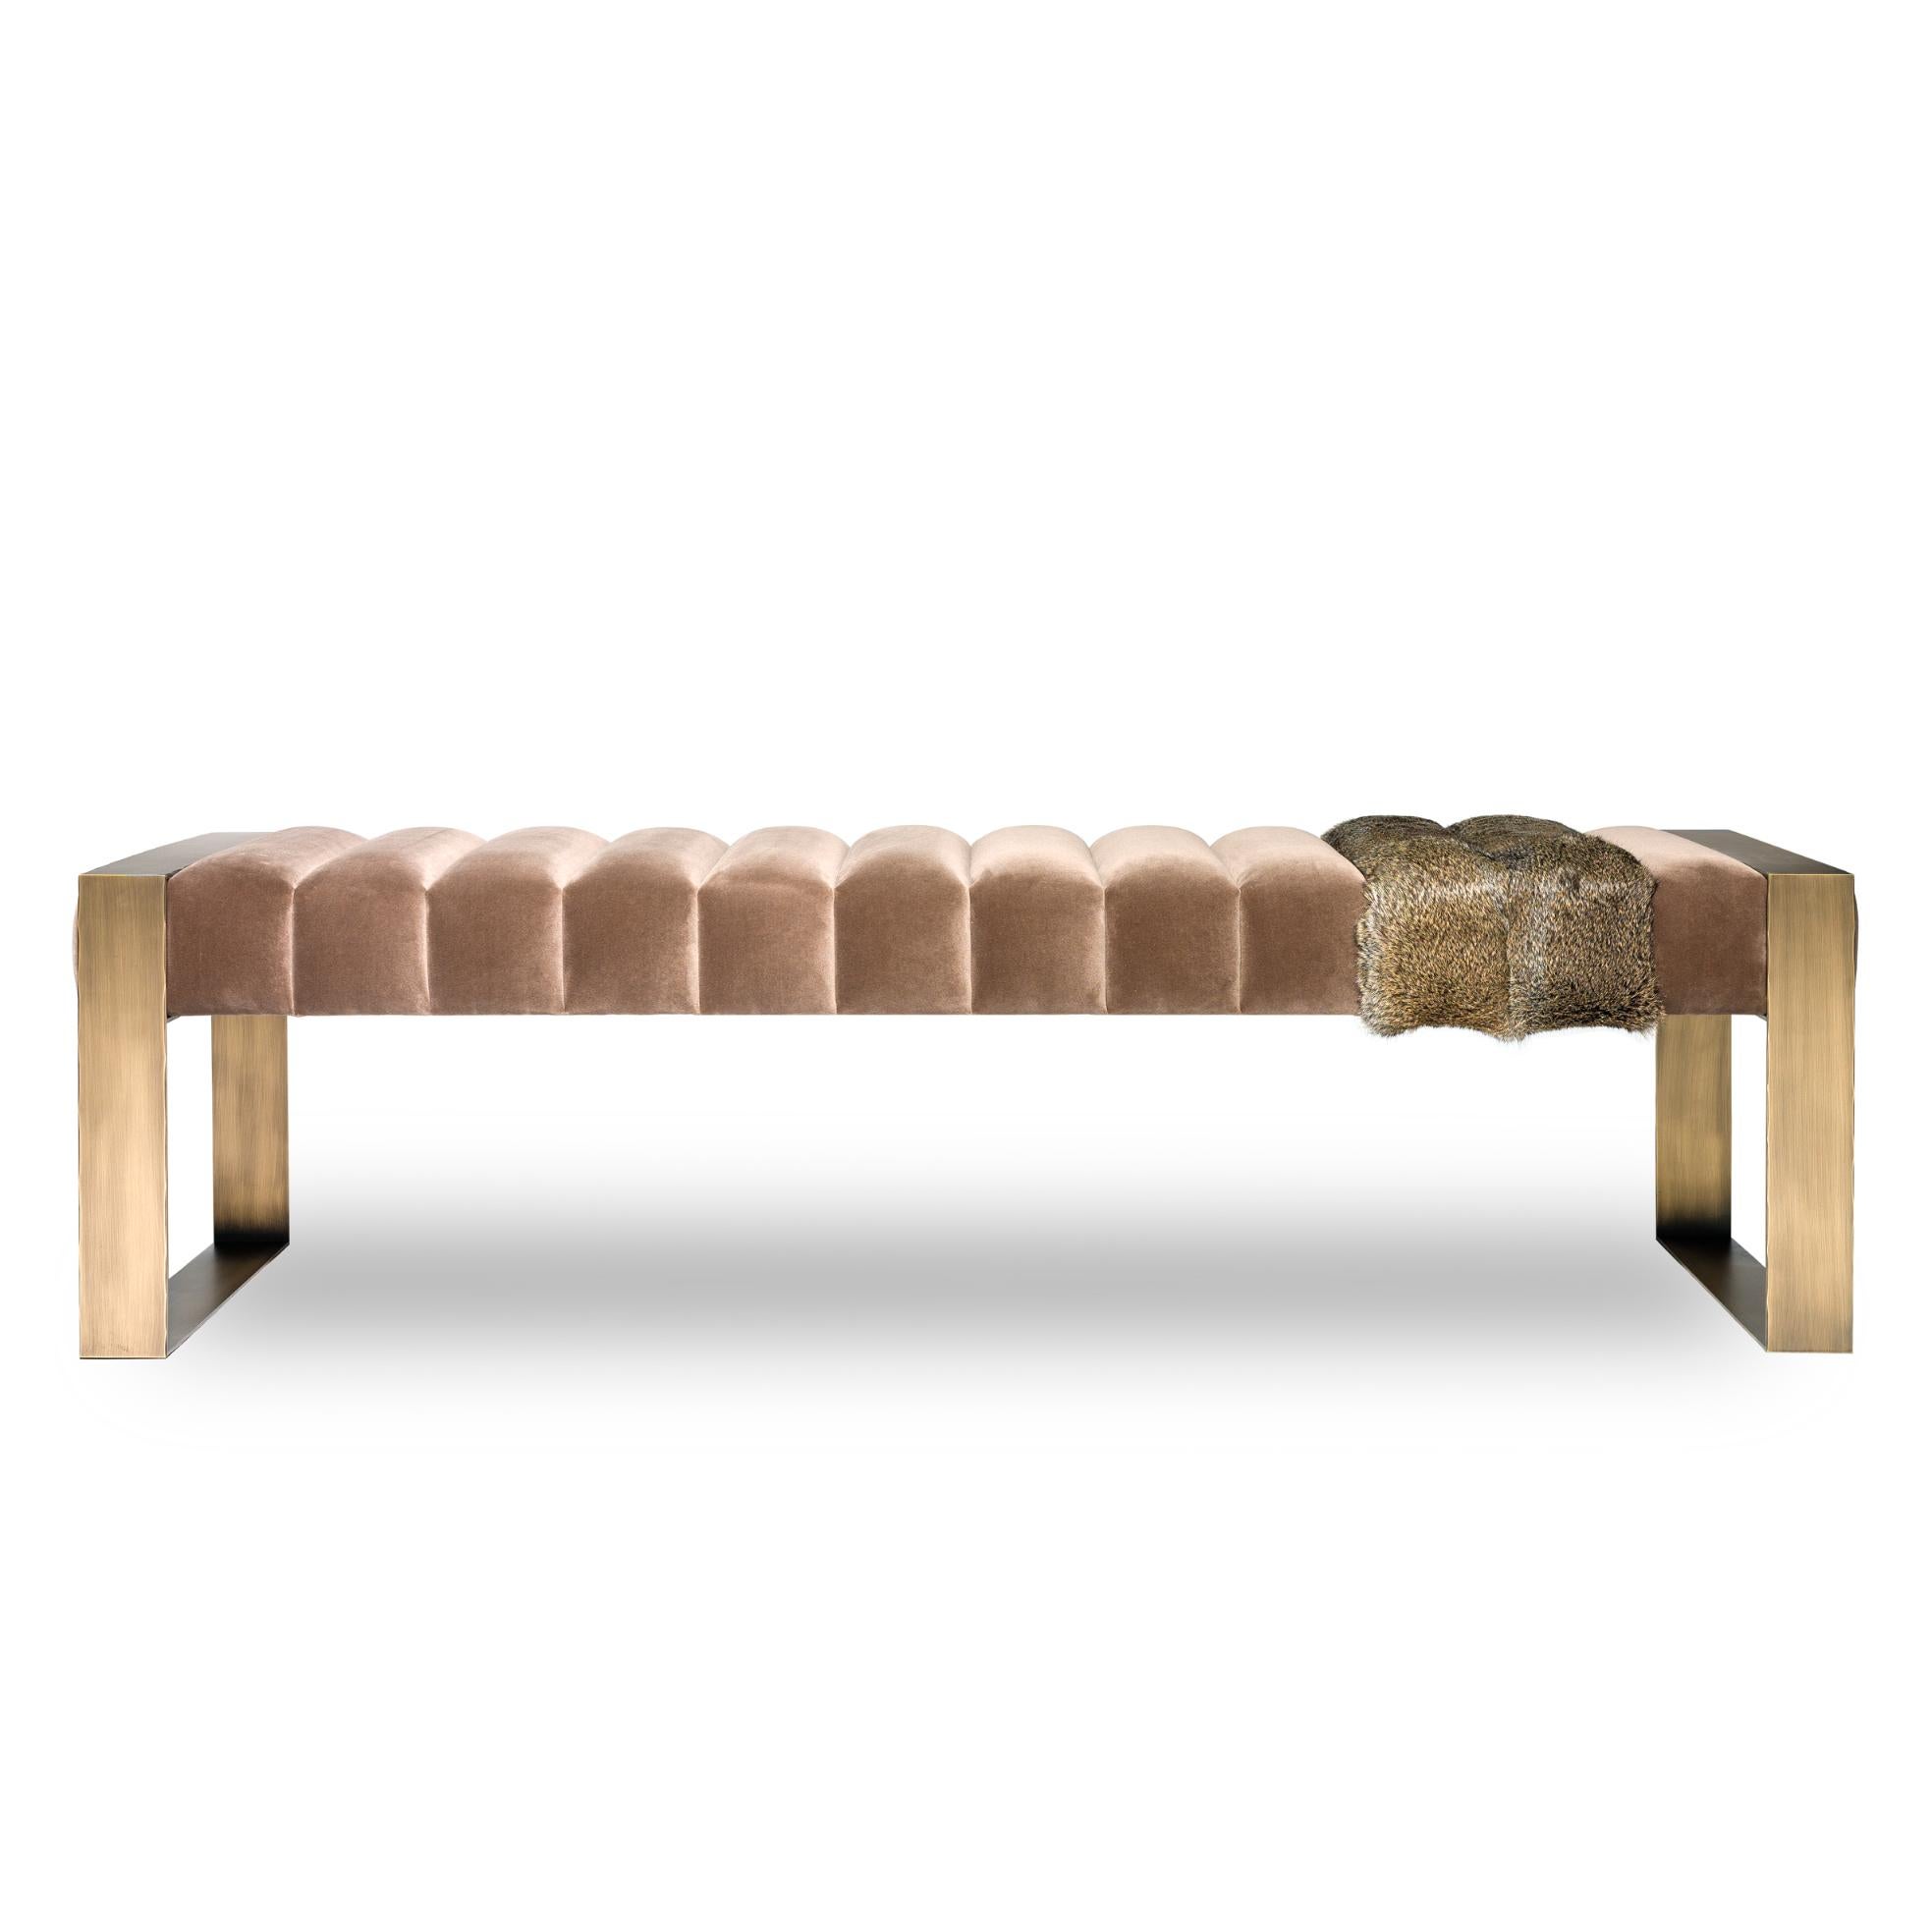 Beige Dawn Bench by Duistt
Dimensions: W 160 x D 50 x H 45 cm
Materials: Duistt Fabric, Fur and Brass

The DAWN bench, crafted with great attention to detail, is a statement design piece. The name Dawn is inspired by the pieces clear horizontal